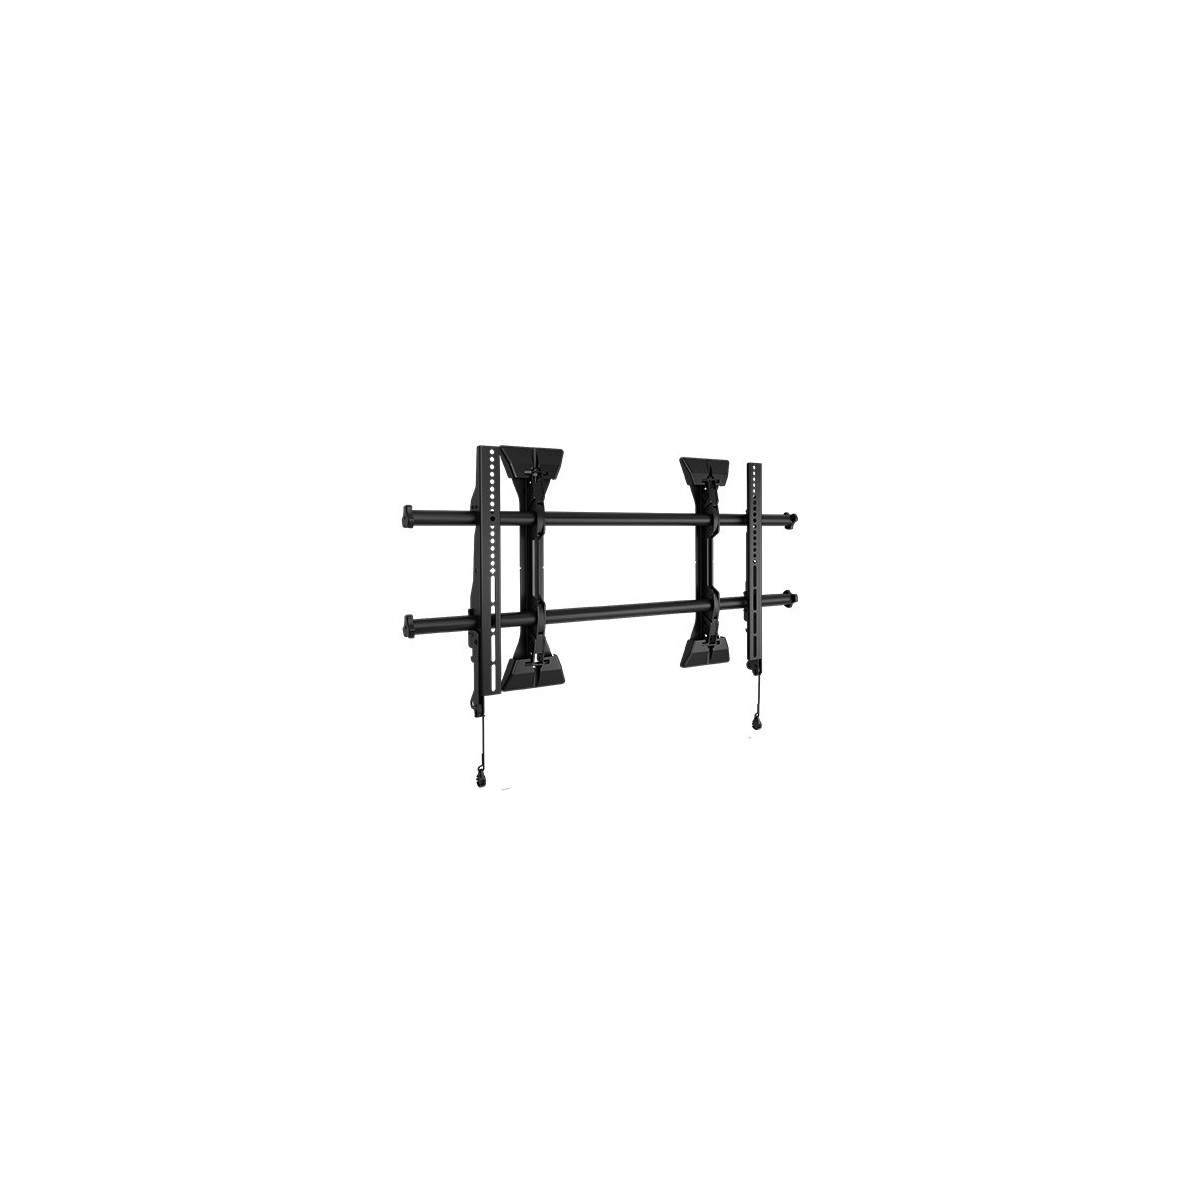 Chief Large Fusion Micro-Adjustable Fixed Wall Display Mount - 90.7 kg - 106.7 cm (42") - 2.18 m (86") - 100 x 100 mm - 800 x 50